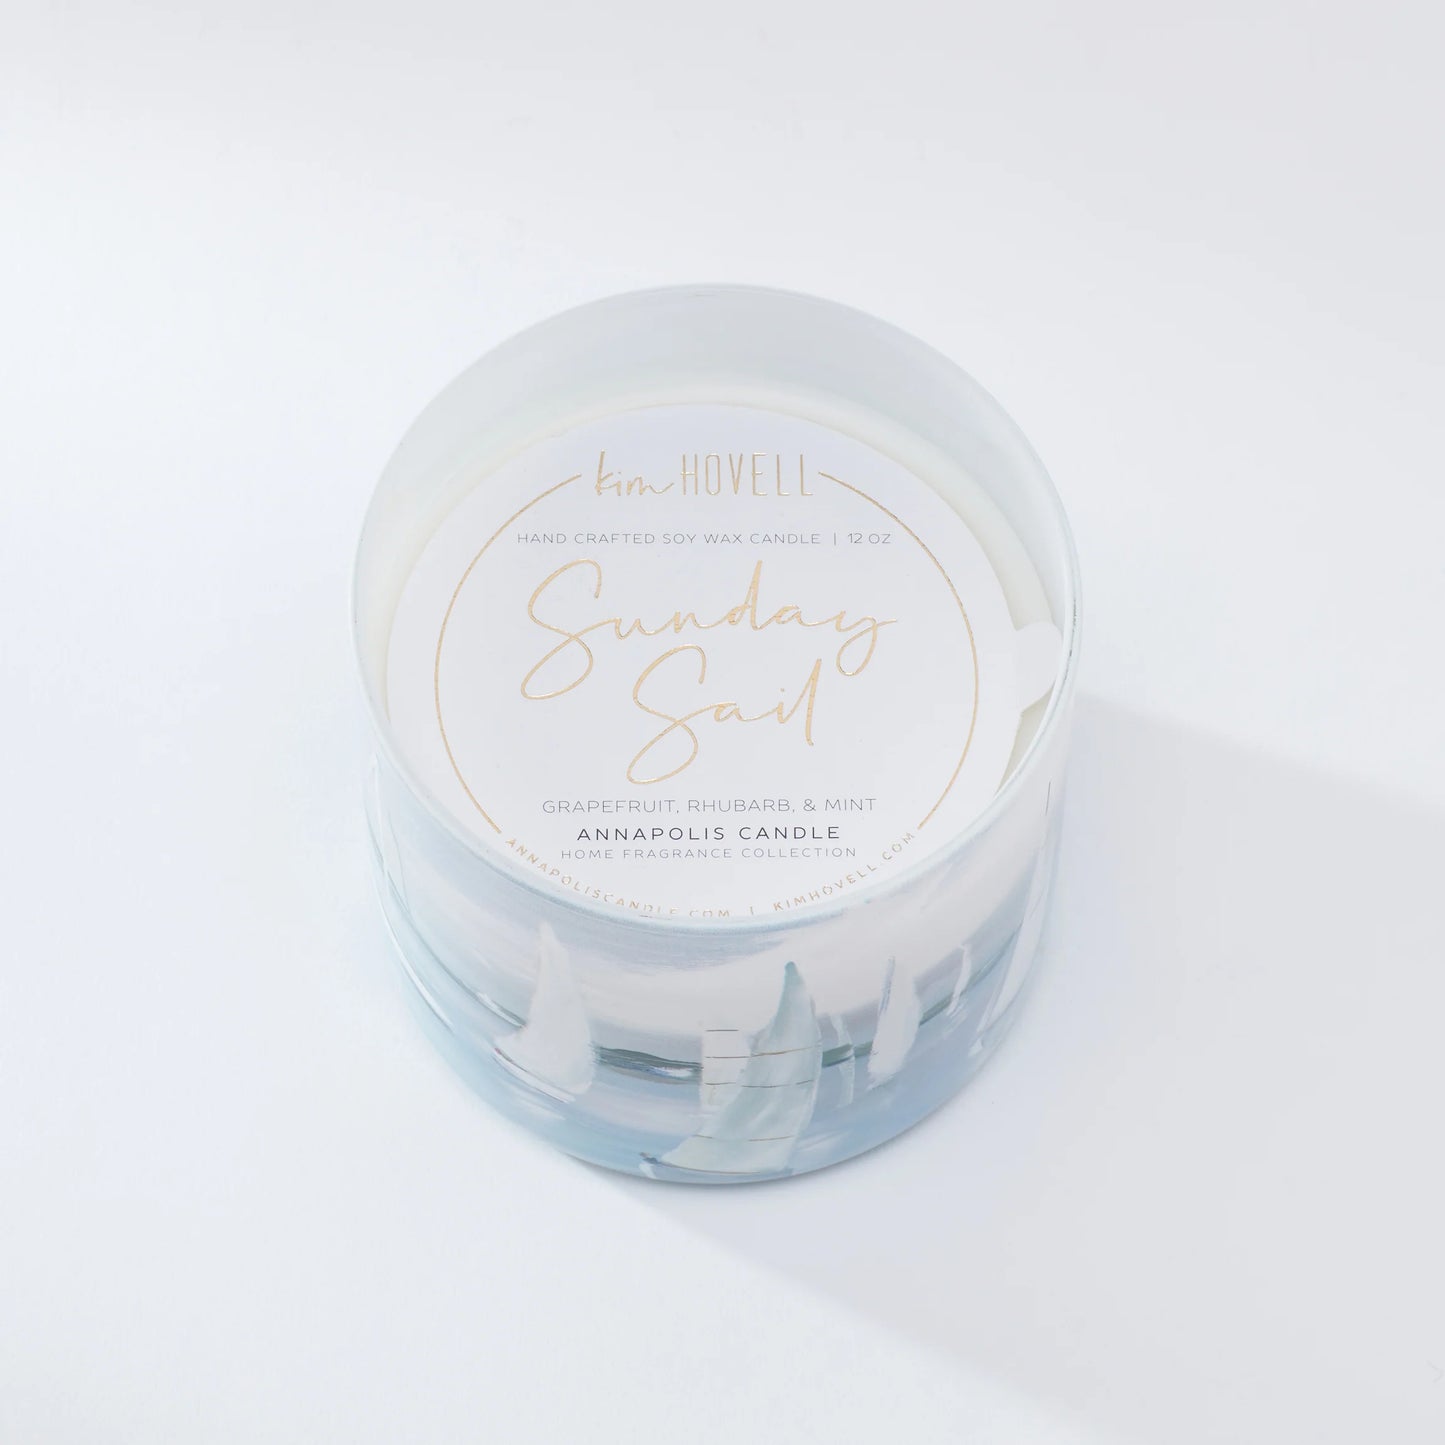 Kim Hovell Sunday Sail 3-Wick Candle